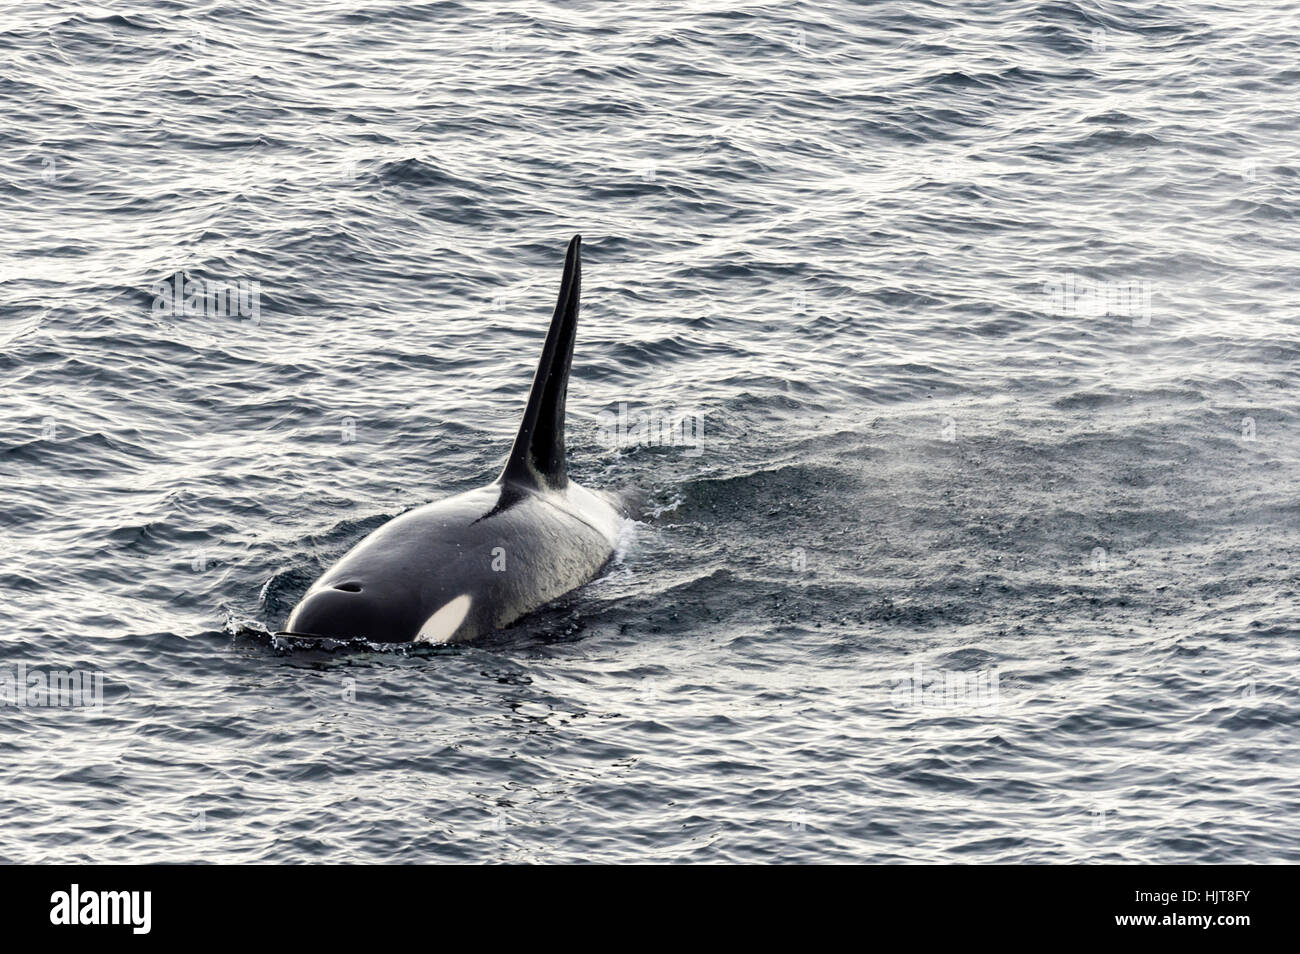 A Killer Whale hunting along the sea ice edge in Antarctica. Stock Photo